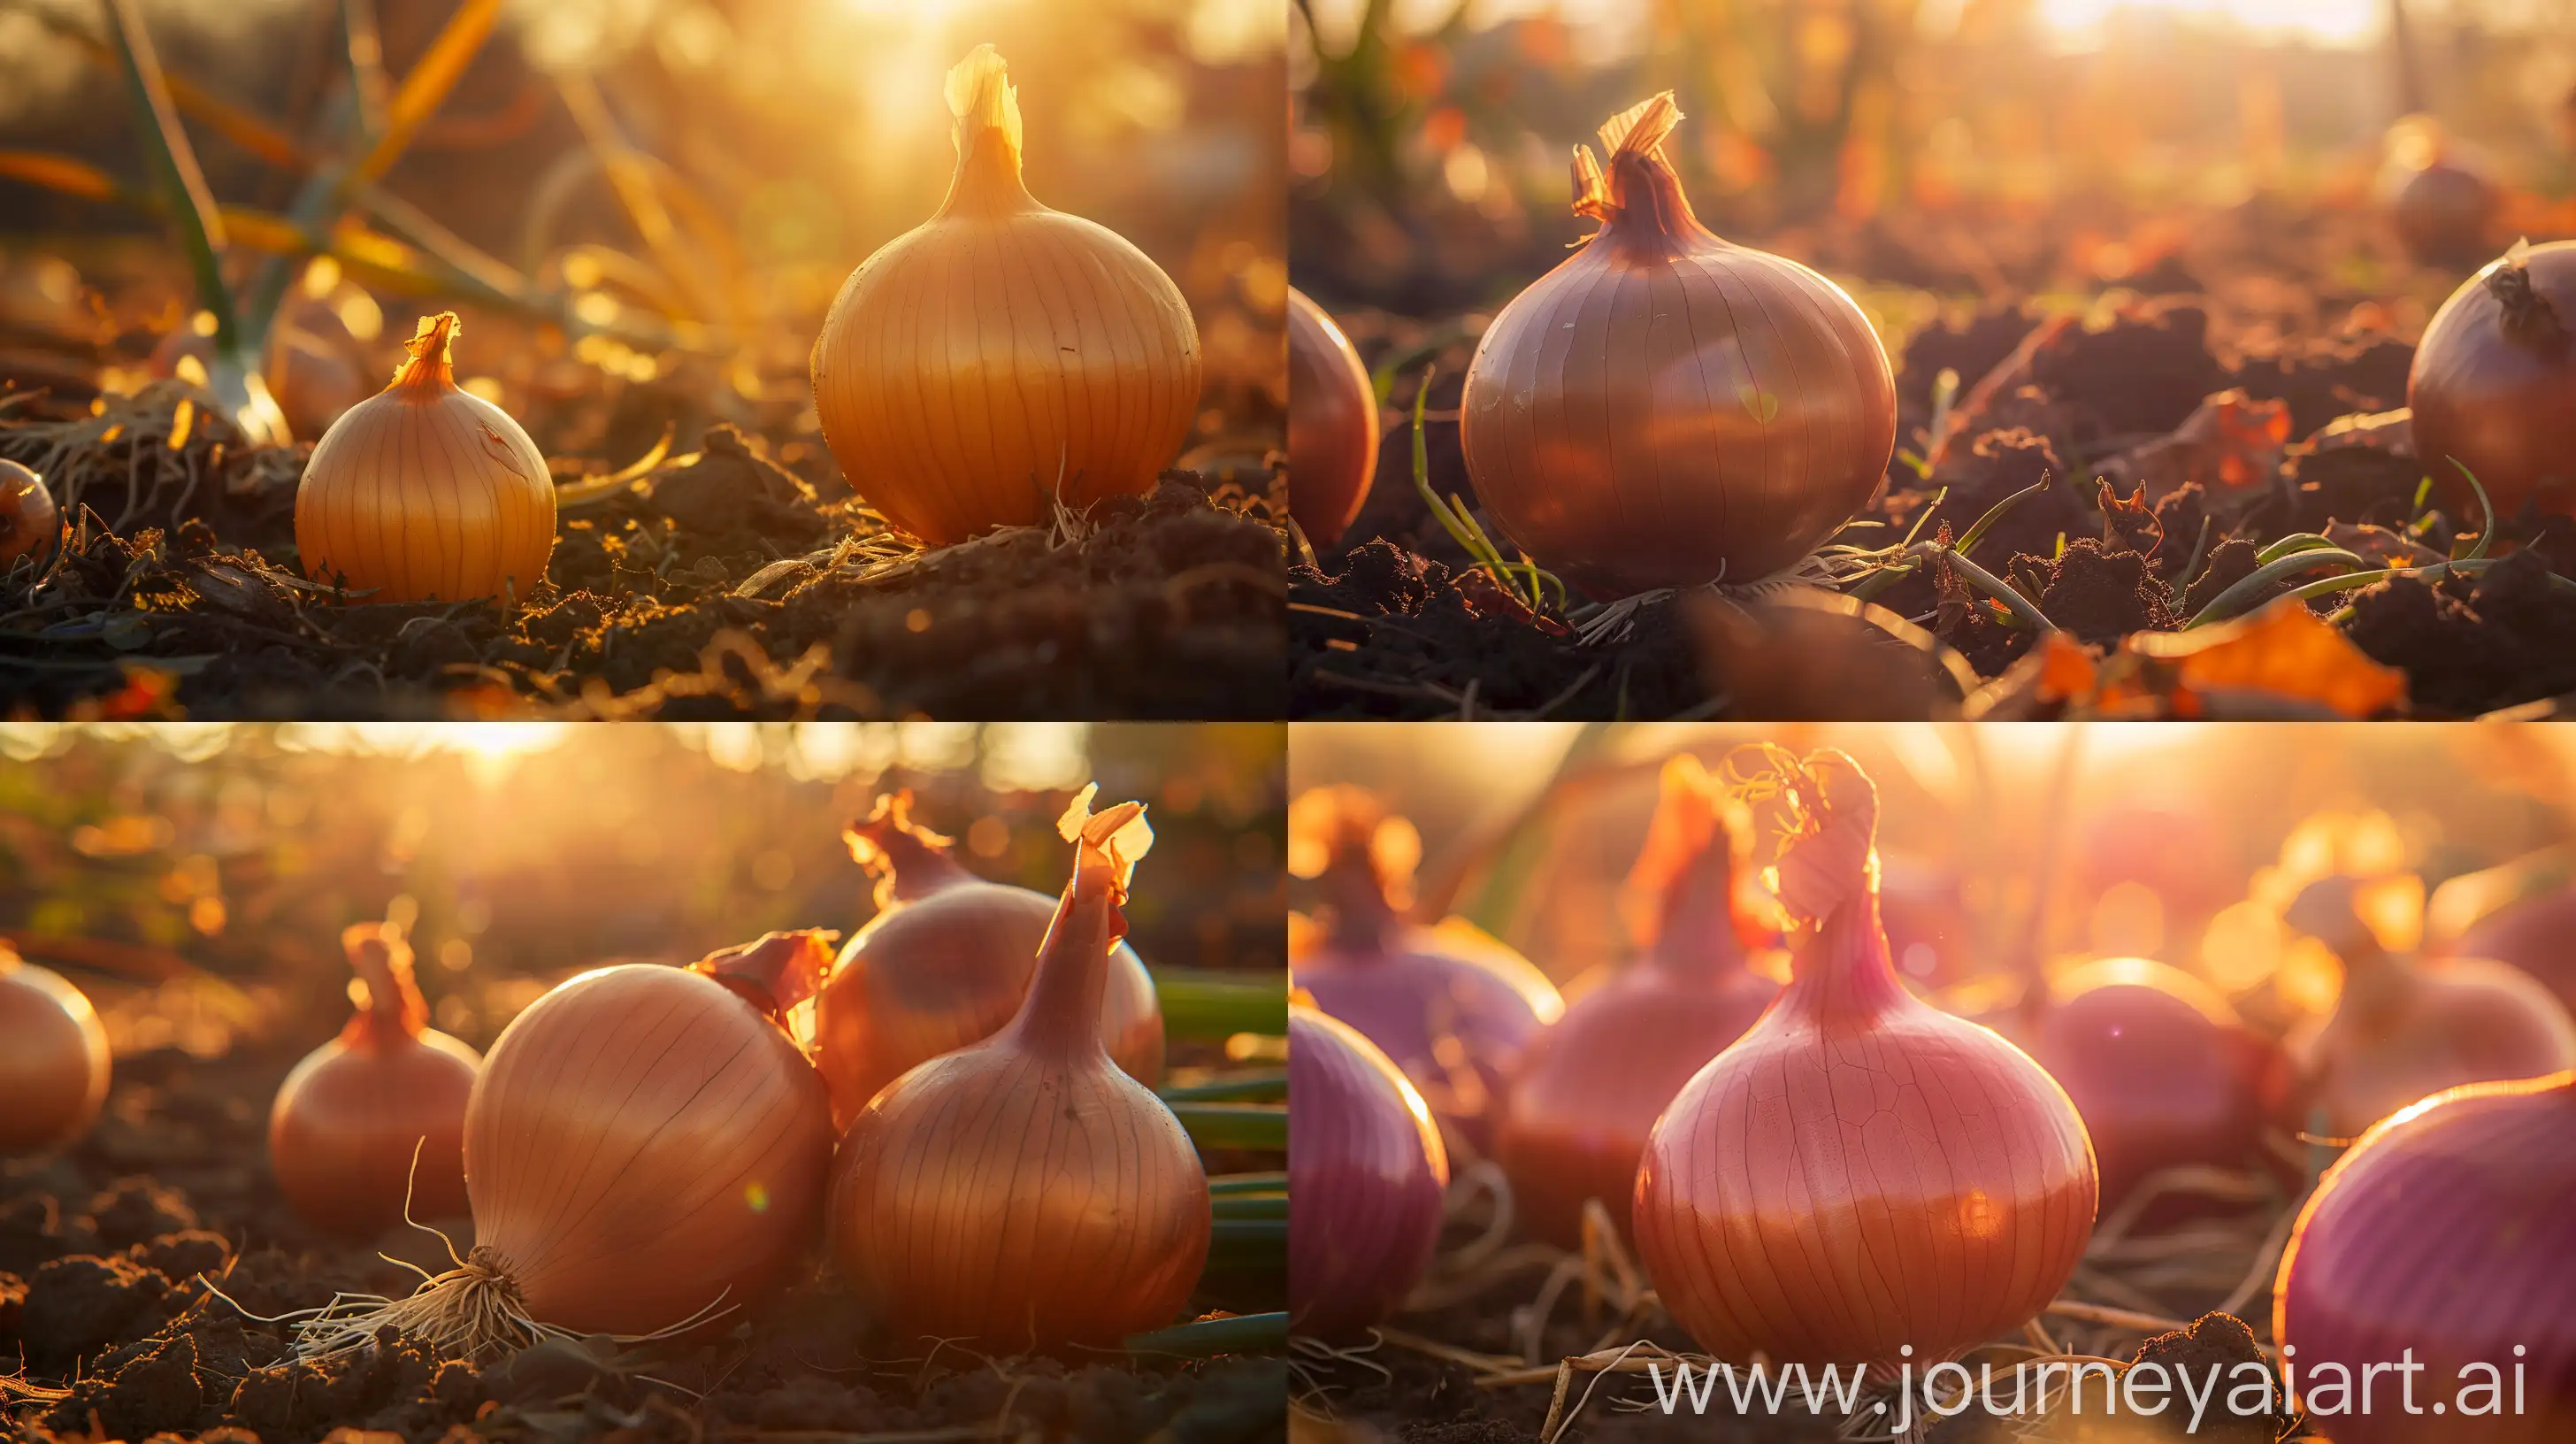 High detailed photo capturing a Onion, Patterson Hybrid. The sun, casting a warm, golden glow, bathes the scene in a serene ambiance, illuminating the intricate details of each element. The composition centers on a Onion, Patterson Hybrid. ‘Patterson’ is a keeper—the longest-storing onion you can find. Well into winter, delight in the lasting bounty of straw-colored, globe-shaped 3 ½-4” bulbs with sweet, mildly pungent yellow flesh. Long after other onion varieties have gone soft, ‘Patterso. The image evokes a sense of tranquility and natural beauty, inviting viewers to immerse themselves in the splendor of the landscape. --ar 16:9 